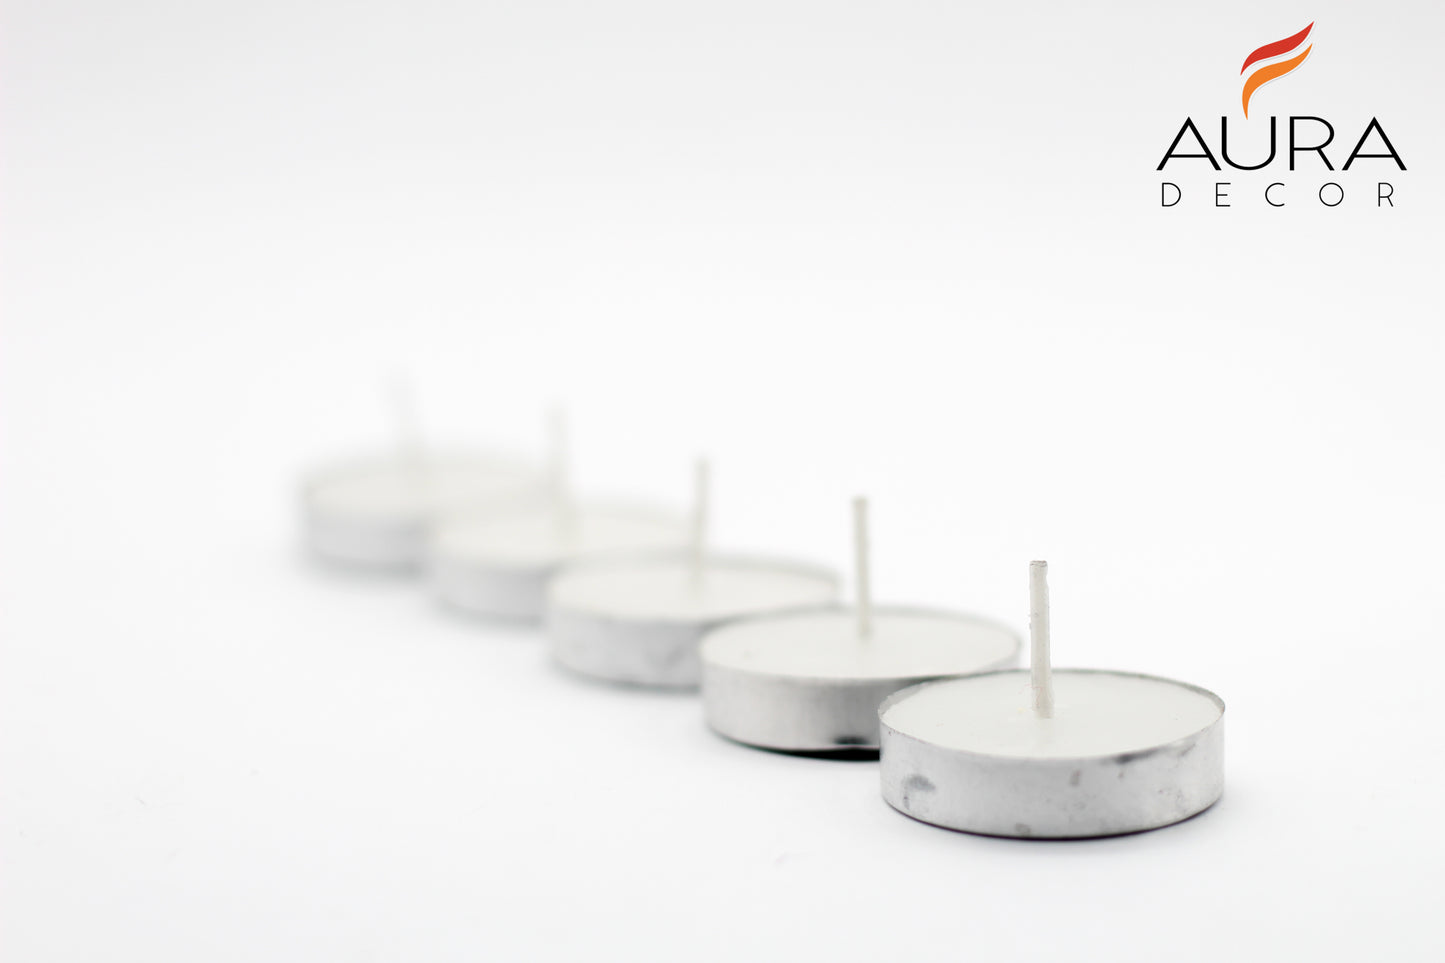 Pack of 100 Tealight Candles ( Burning Time 2.5 Hours ) - auradecor.co.in